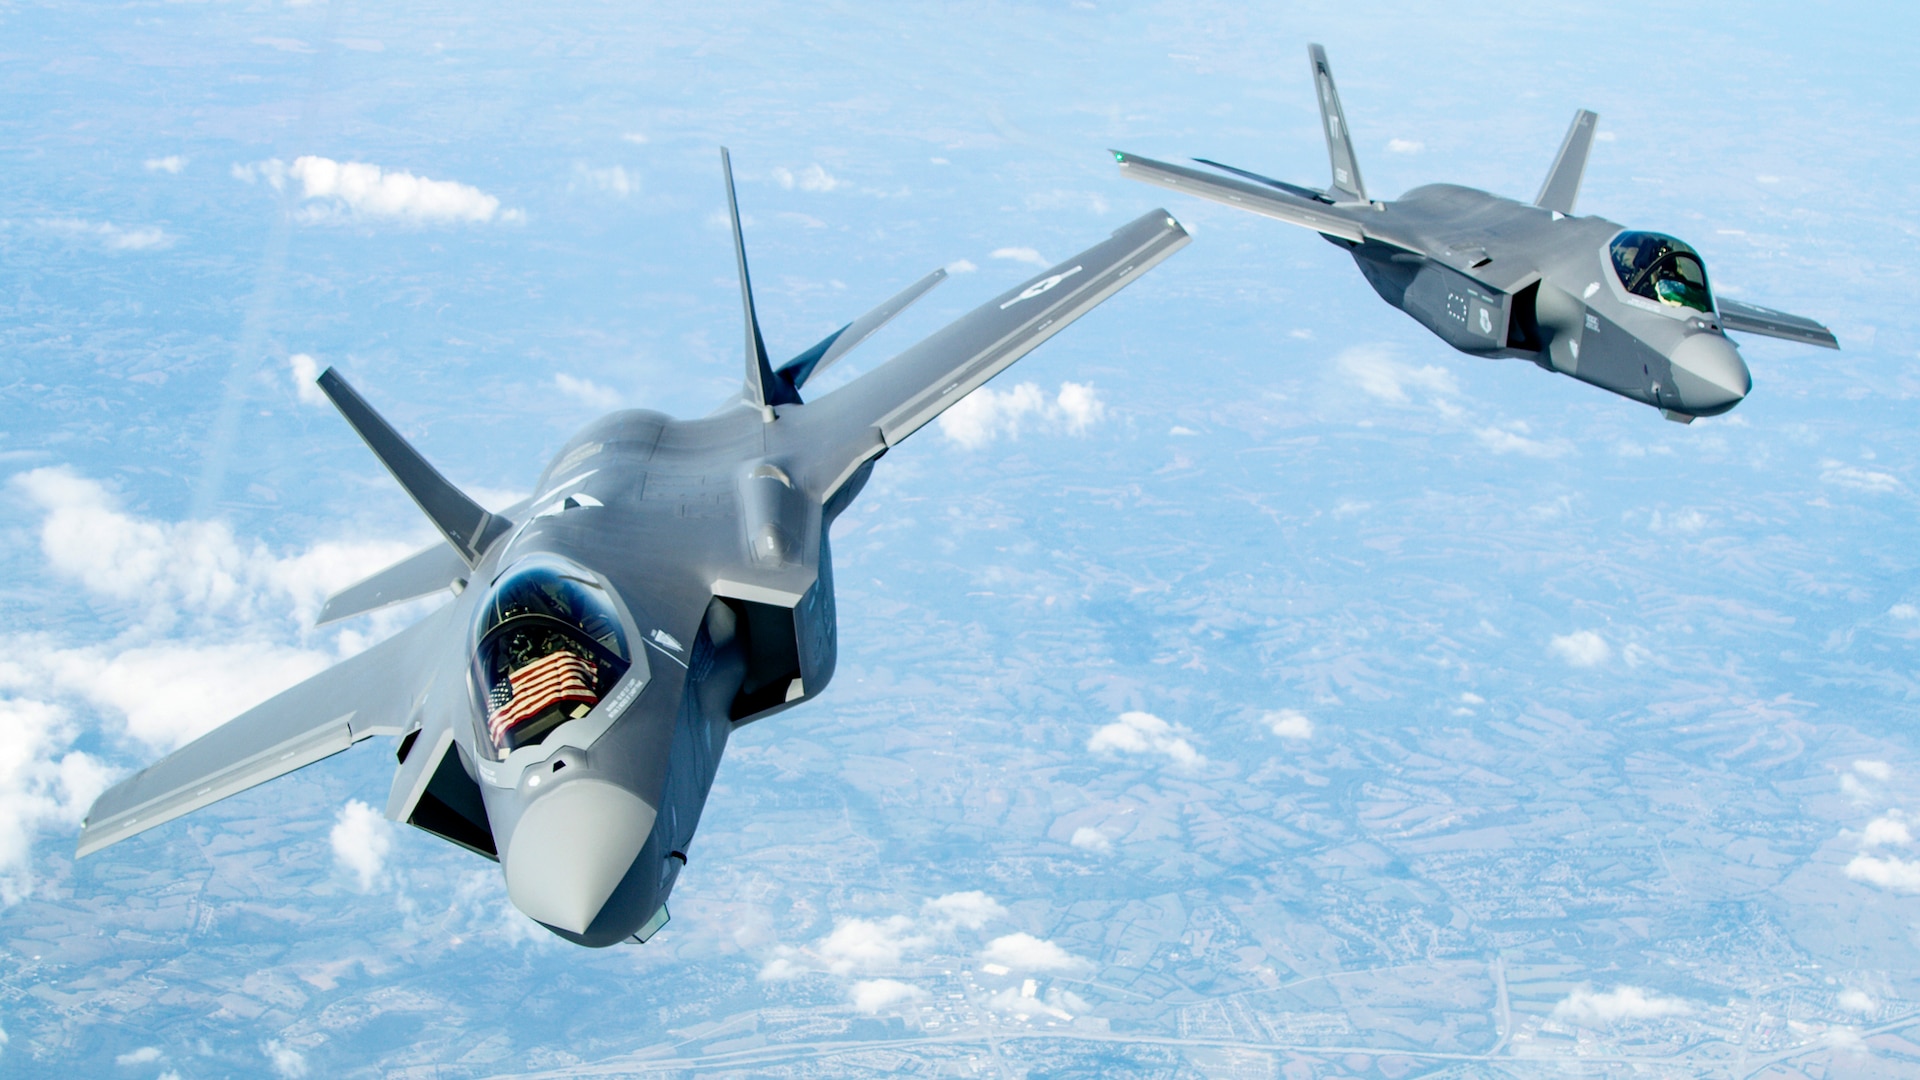 Two F-35 Lightning II’s bank after receiving fuel over the Midwest Sept. 19, 2019. The two aircraft were in route to the 158th Fighter Wing out of the Vermont Air National Guard Base, South Burlington, Vt., the fist Air National Guard unit to receive the aircraft. (U.S. Air Force photo/Master Sgt. Ben Mota)